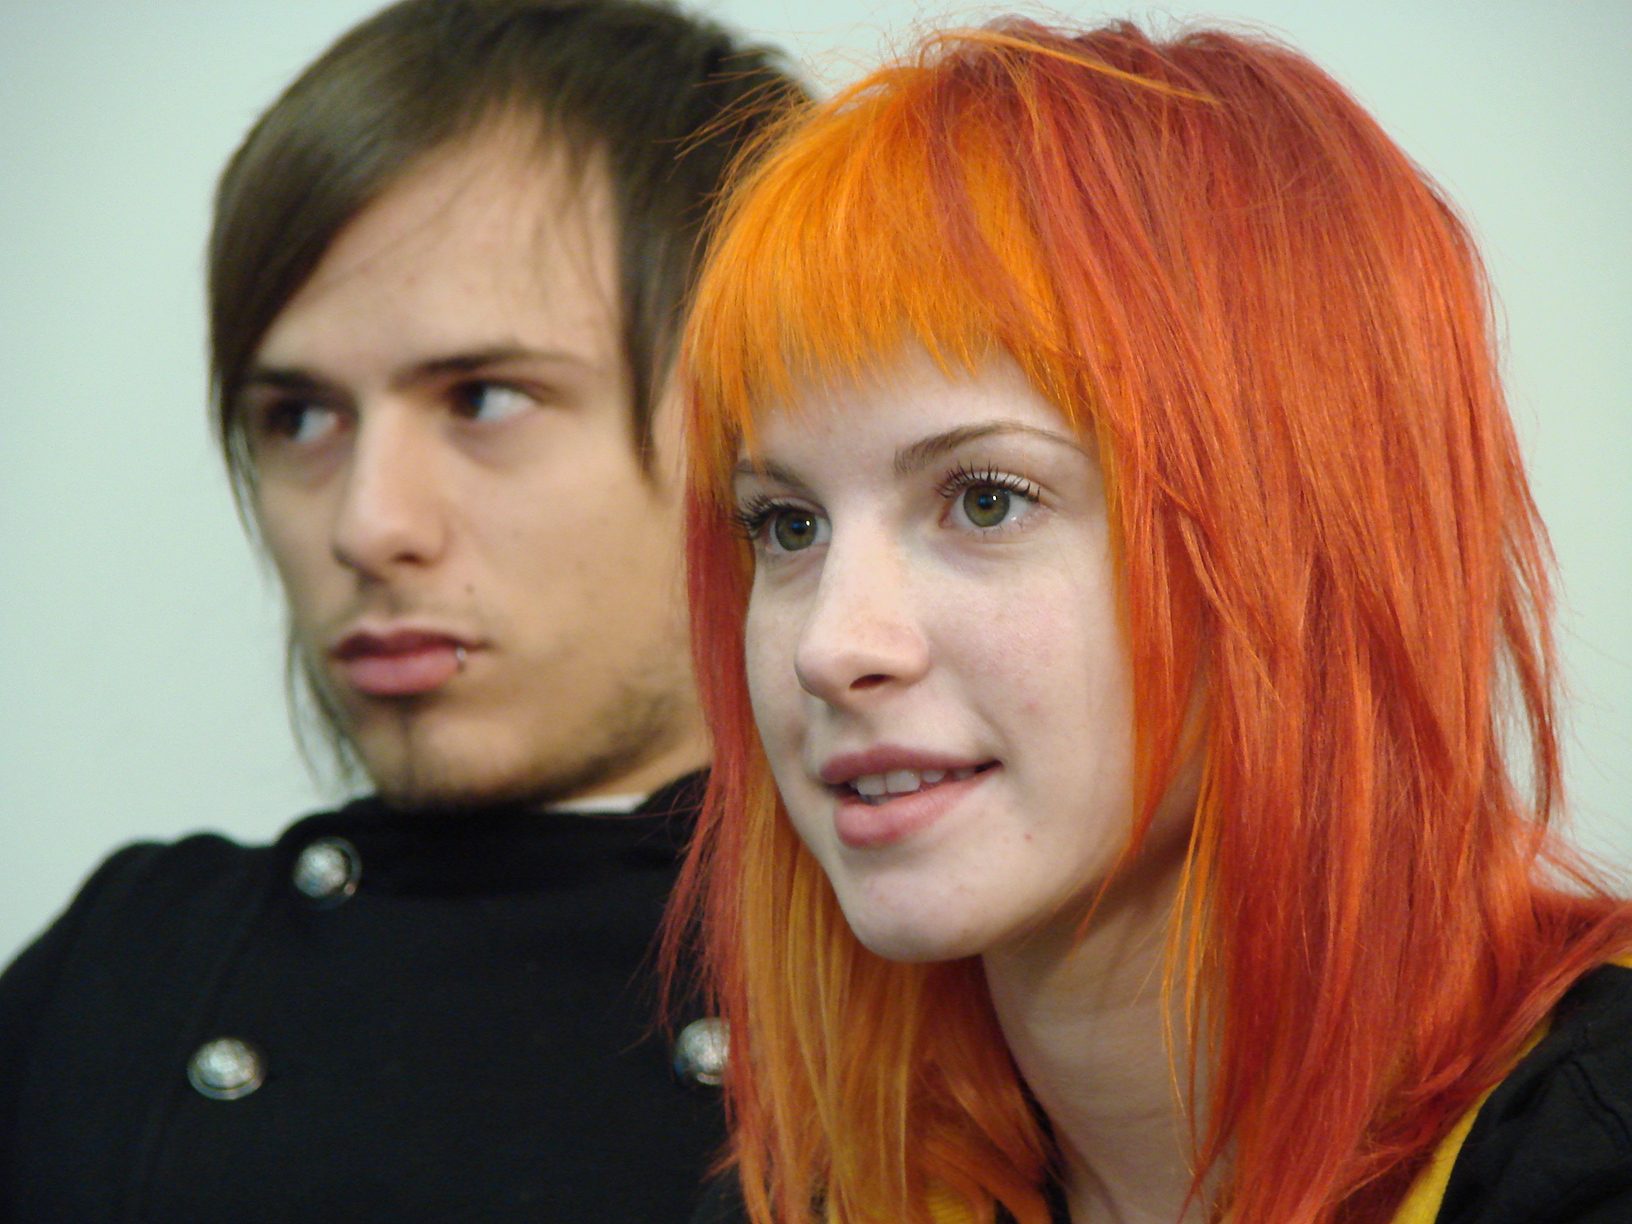 Hayley+williams+hairstyles